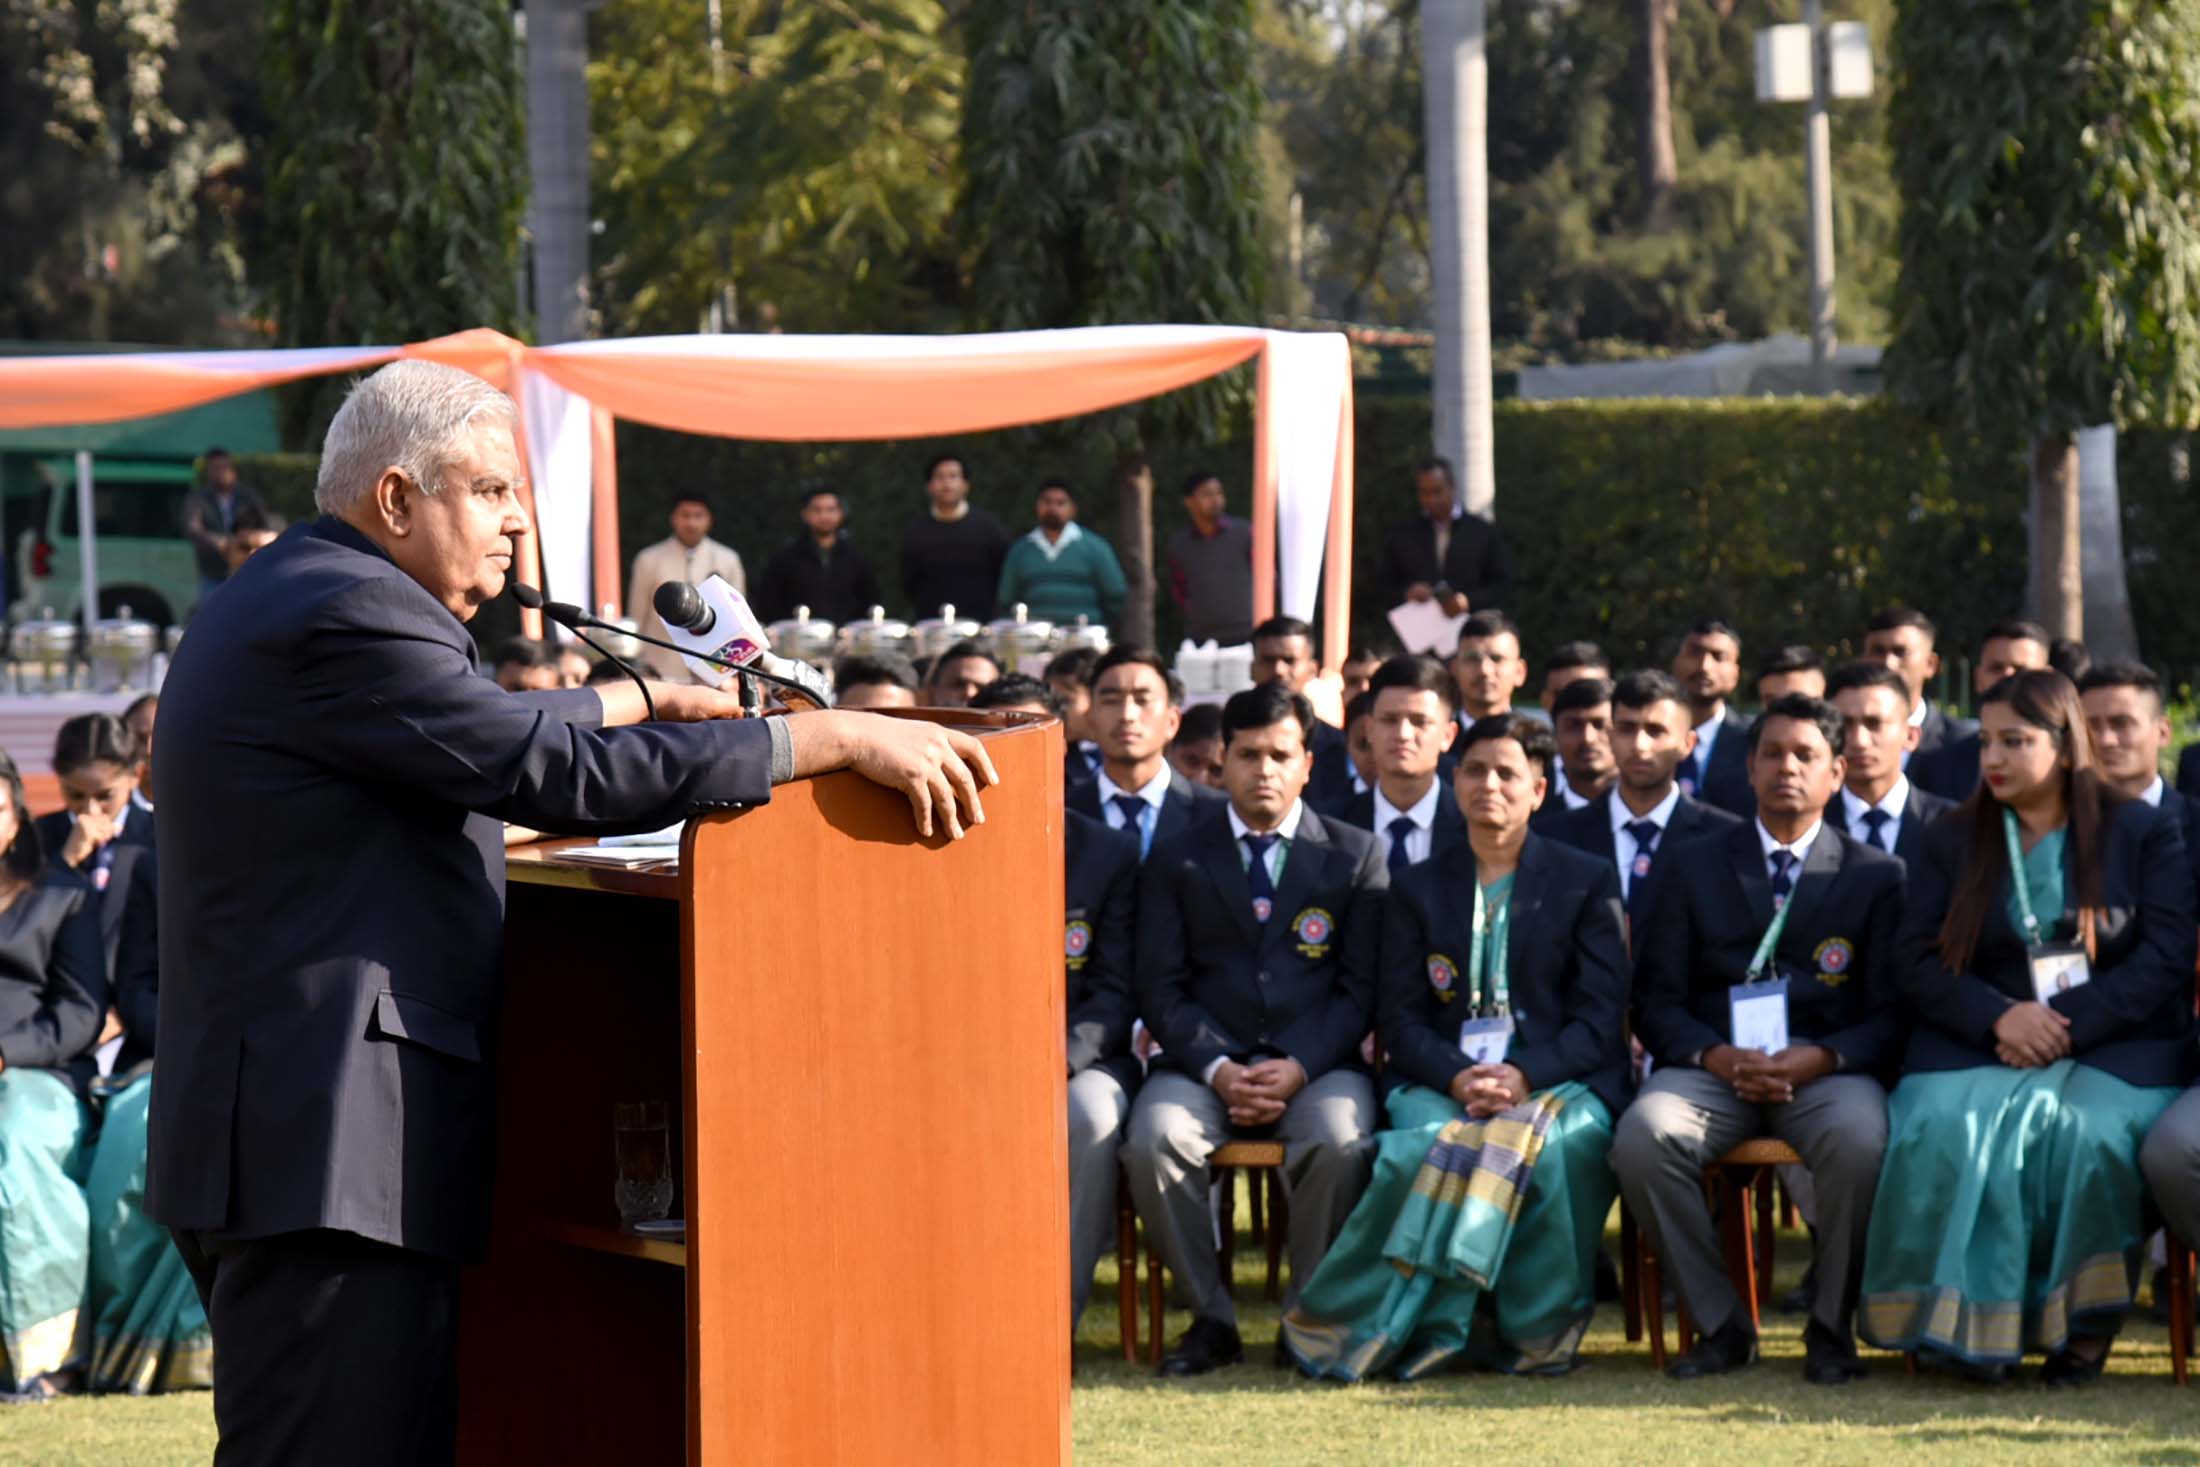 The Vice President, Shri Jagdeep Dhankhar interacted with volunteers of NSS Contingent at Upa-Rashtrapati Nivas on January 27, 2023.